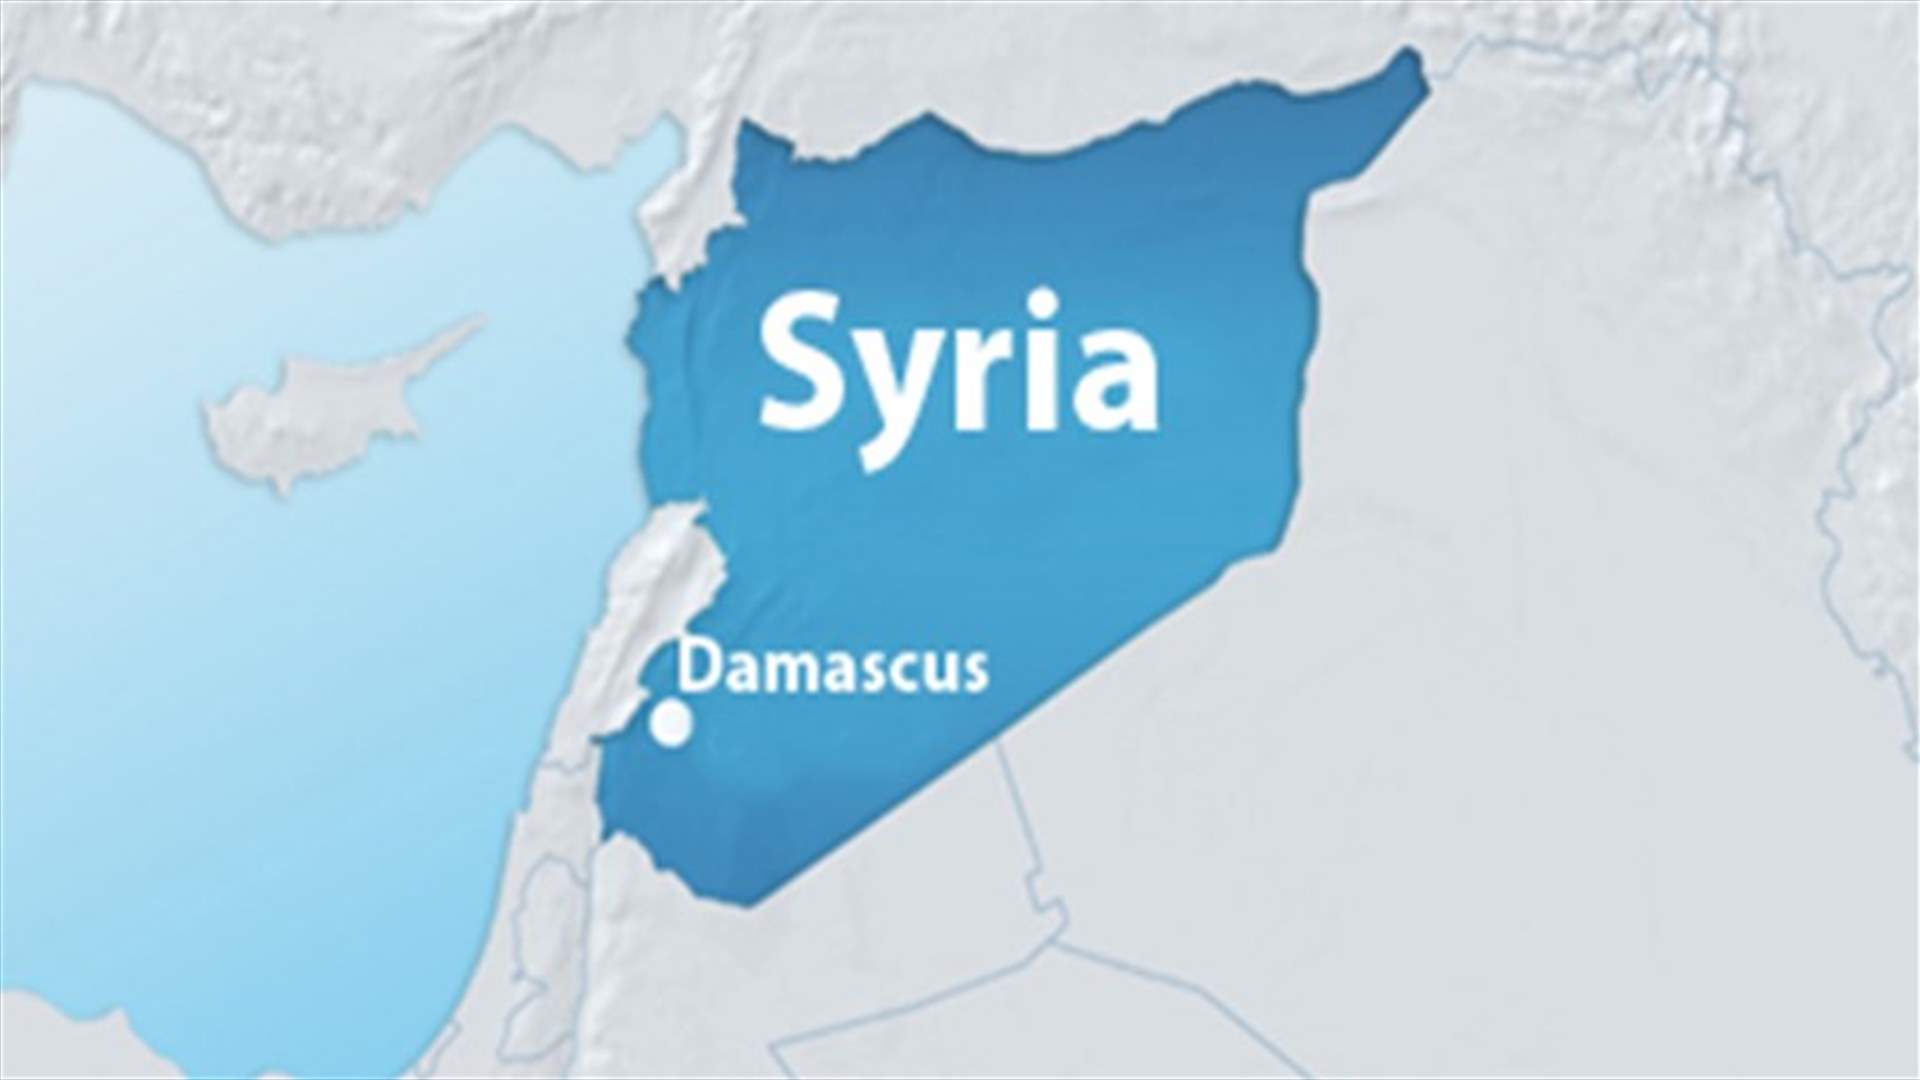 Thirty killed in Syrian strikes on Damascan suburb town - monitor